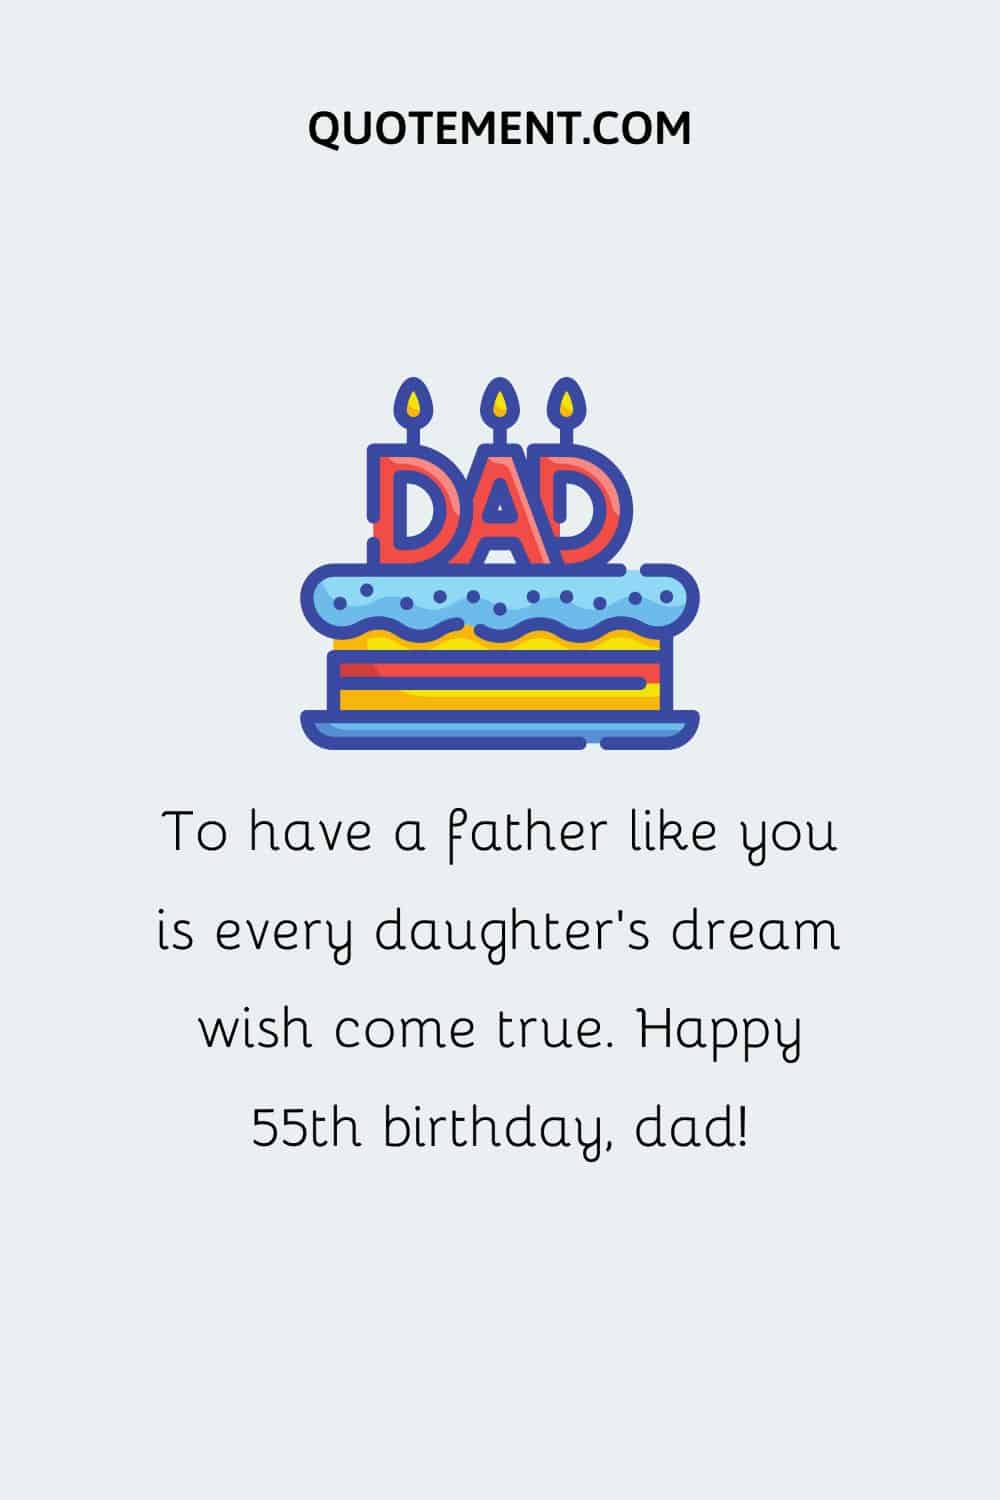 To have a father like you is every daughter’s dream wish come true